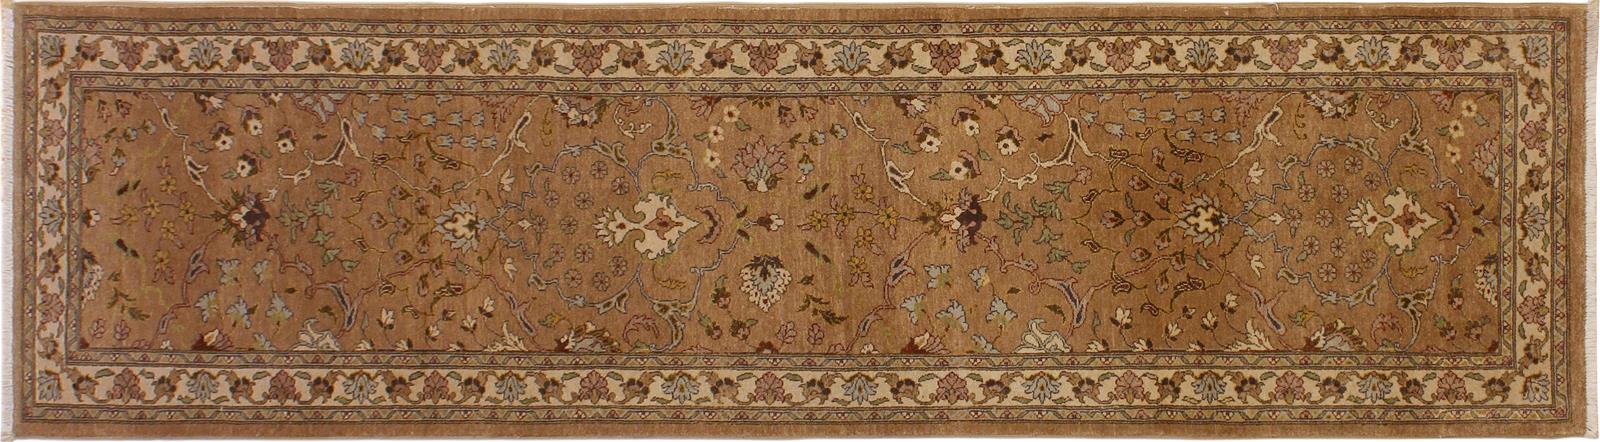 handmade Transitional Kashan Gold Ivory Hand Knotted RUNNER 100% WOOL area rug 3x10